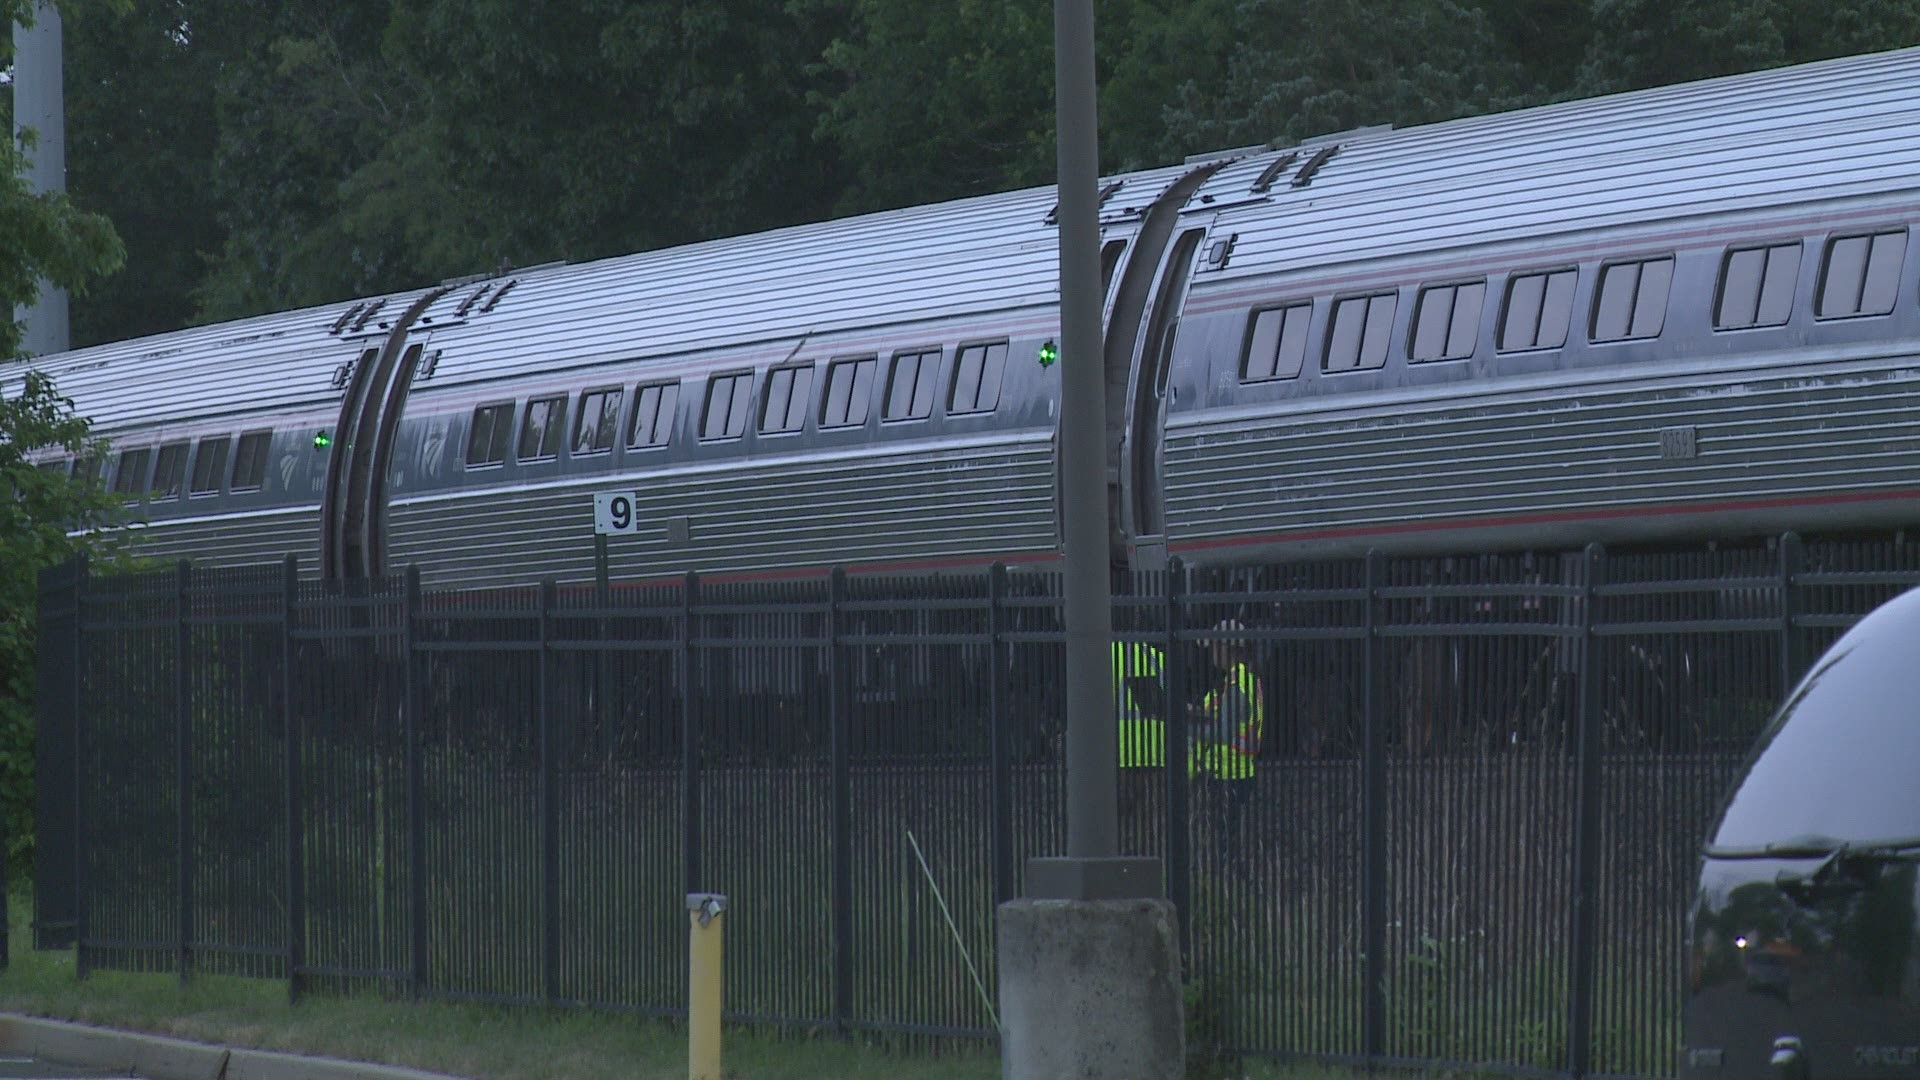 A person was struck and killed by a train in North Haven, police are on scene investigating.